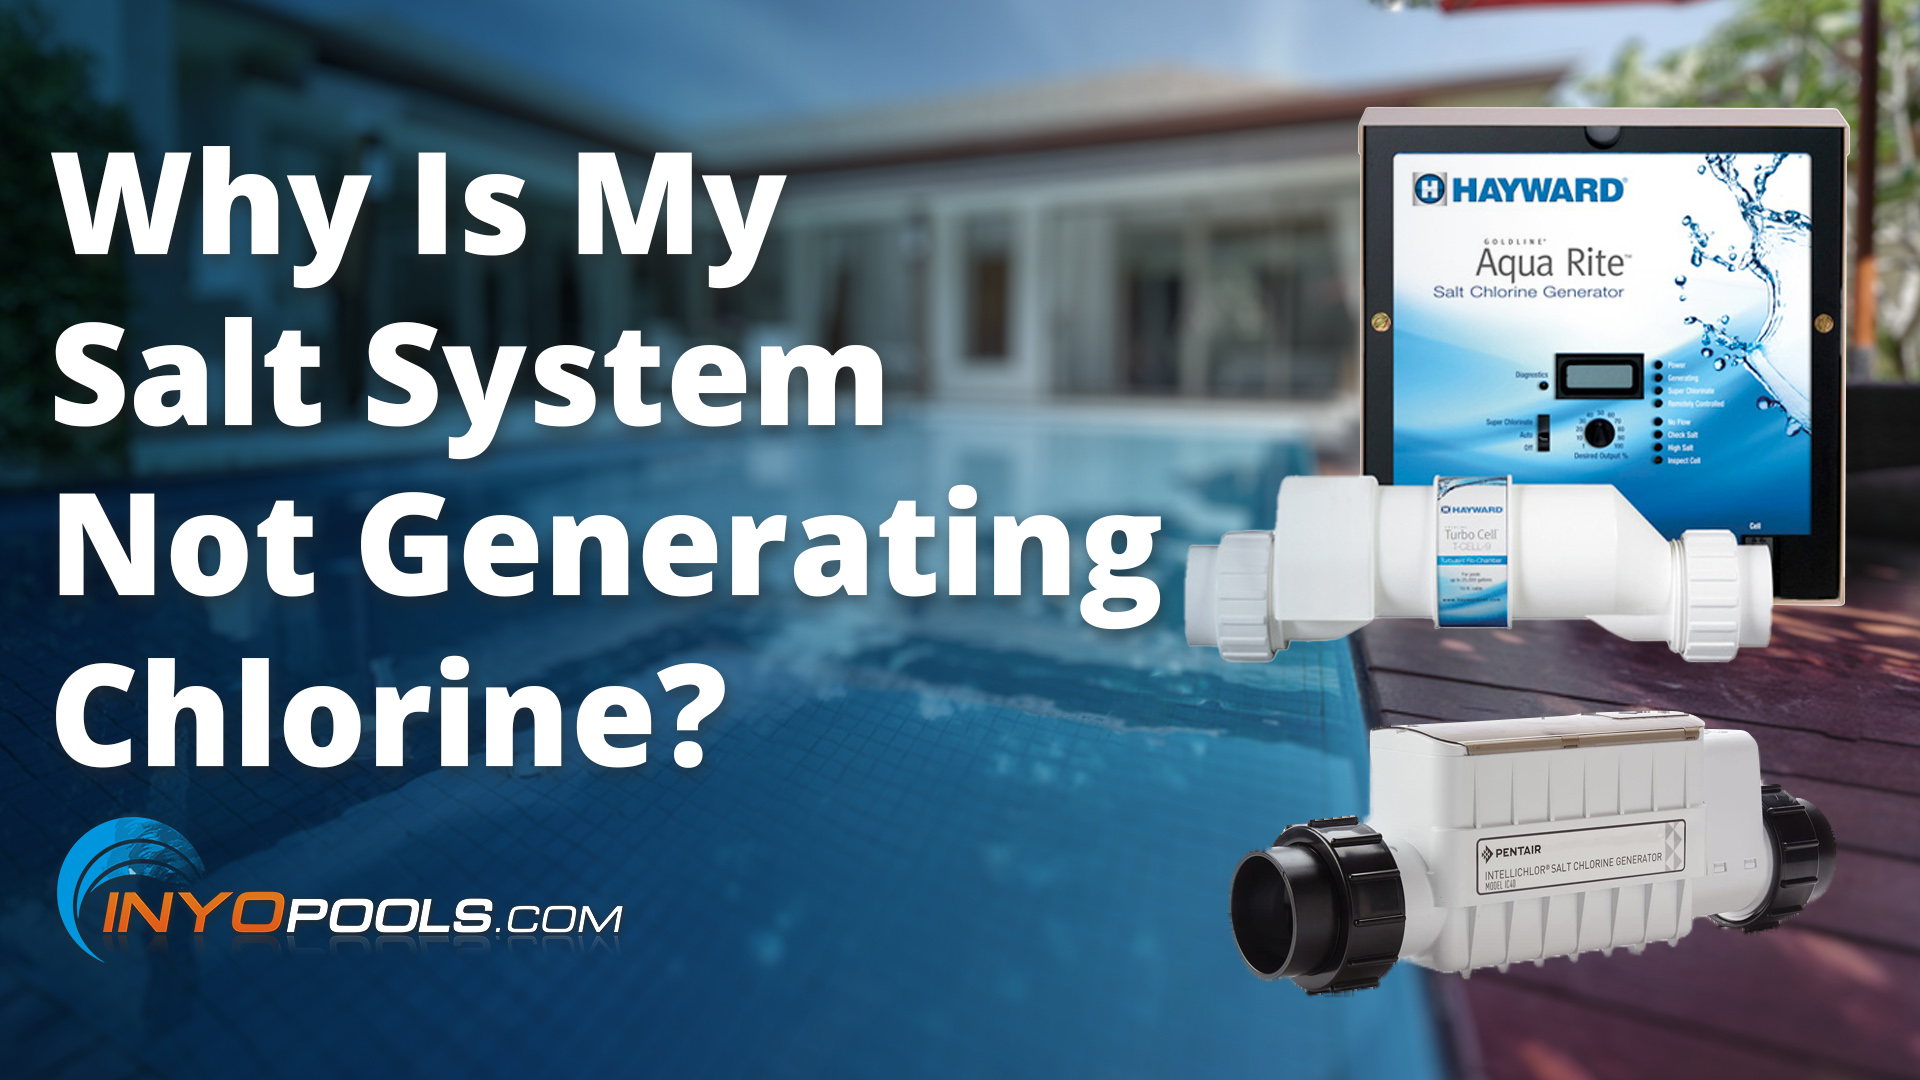 Why Is My Salt System Not Generating Chlorine?